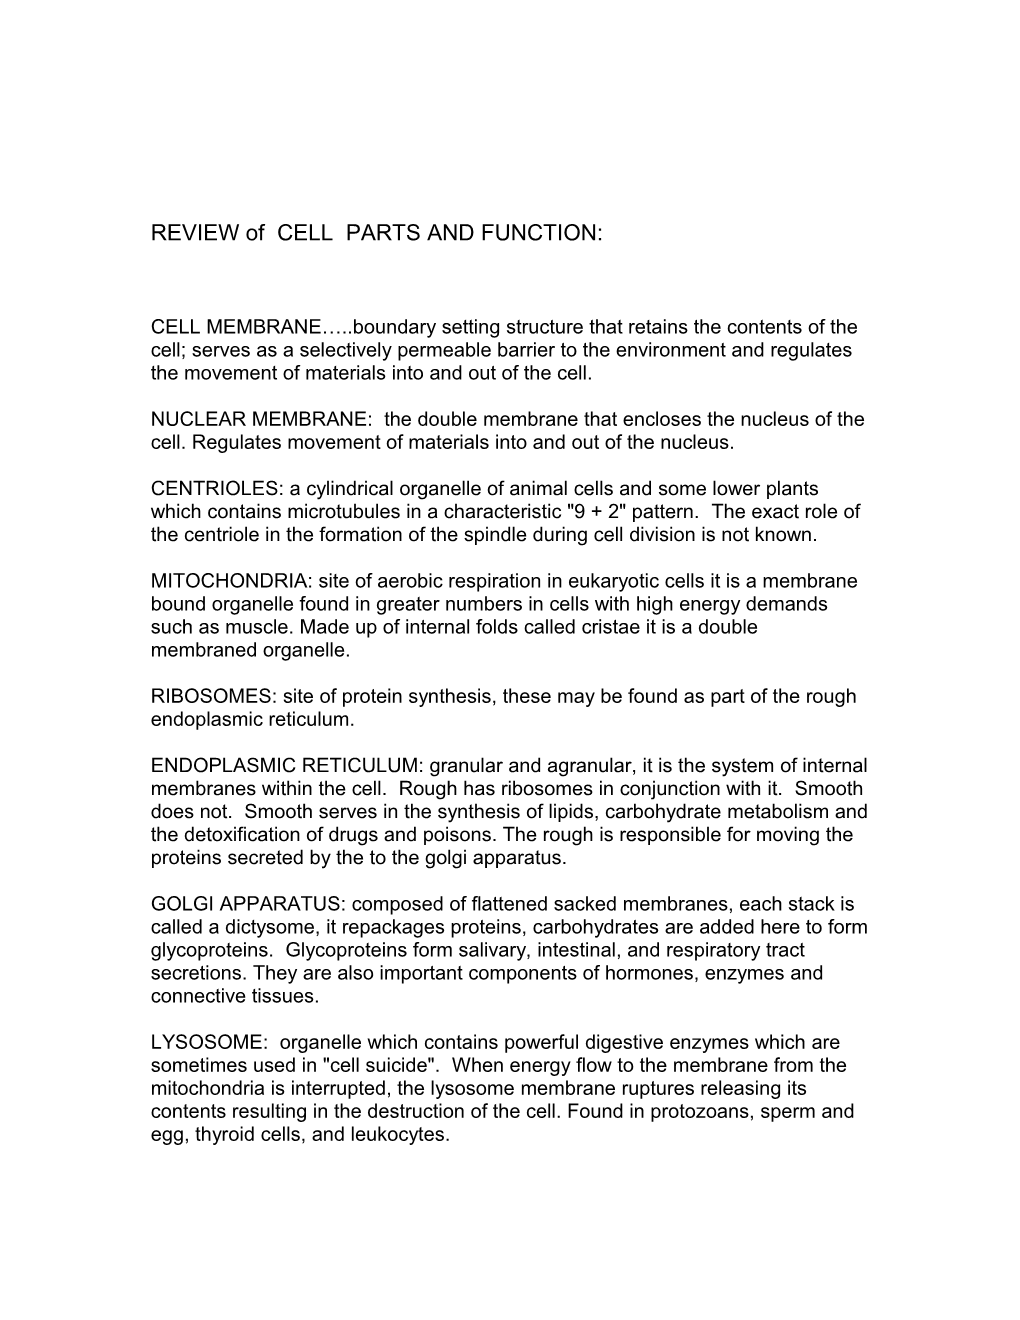 REVIEW of CELL PARTS and FUNCTION